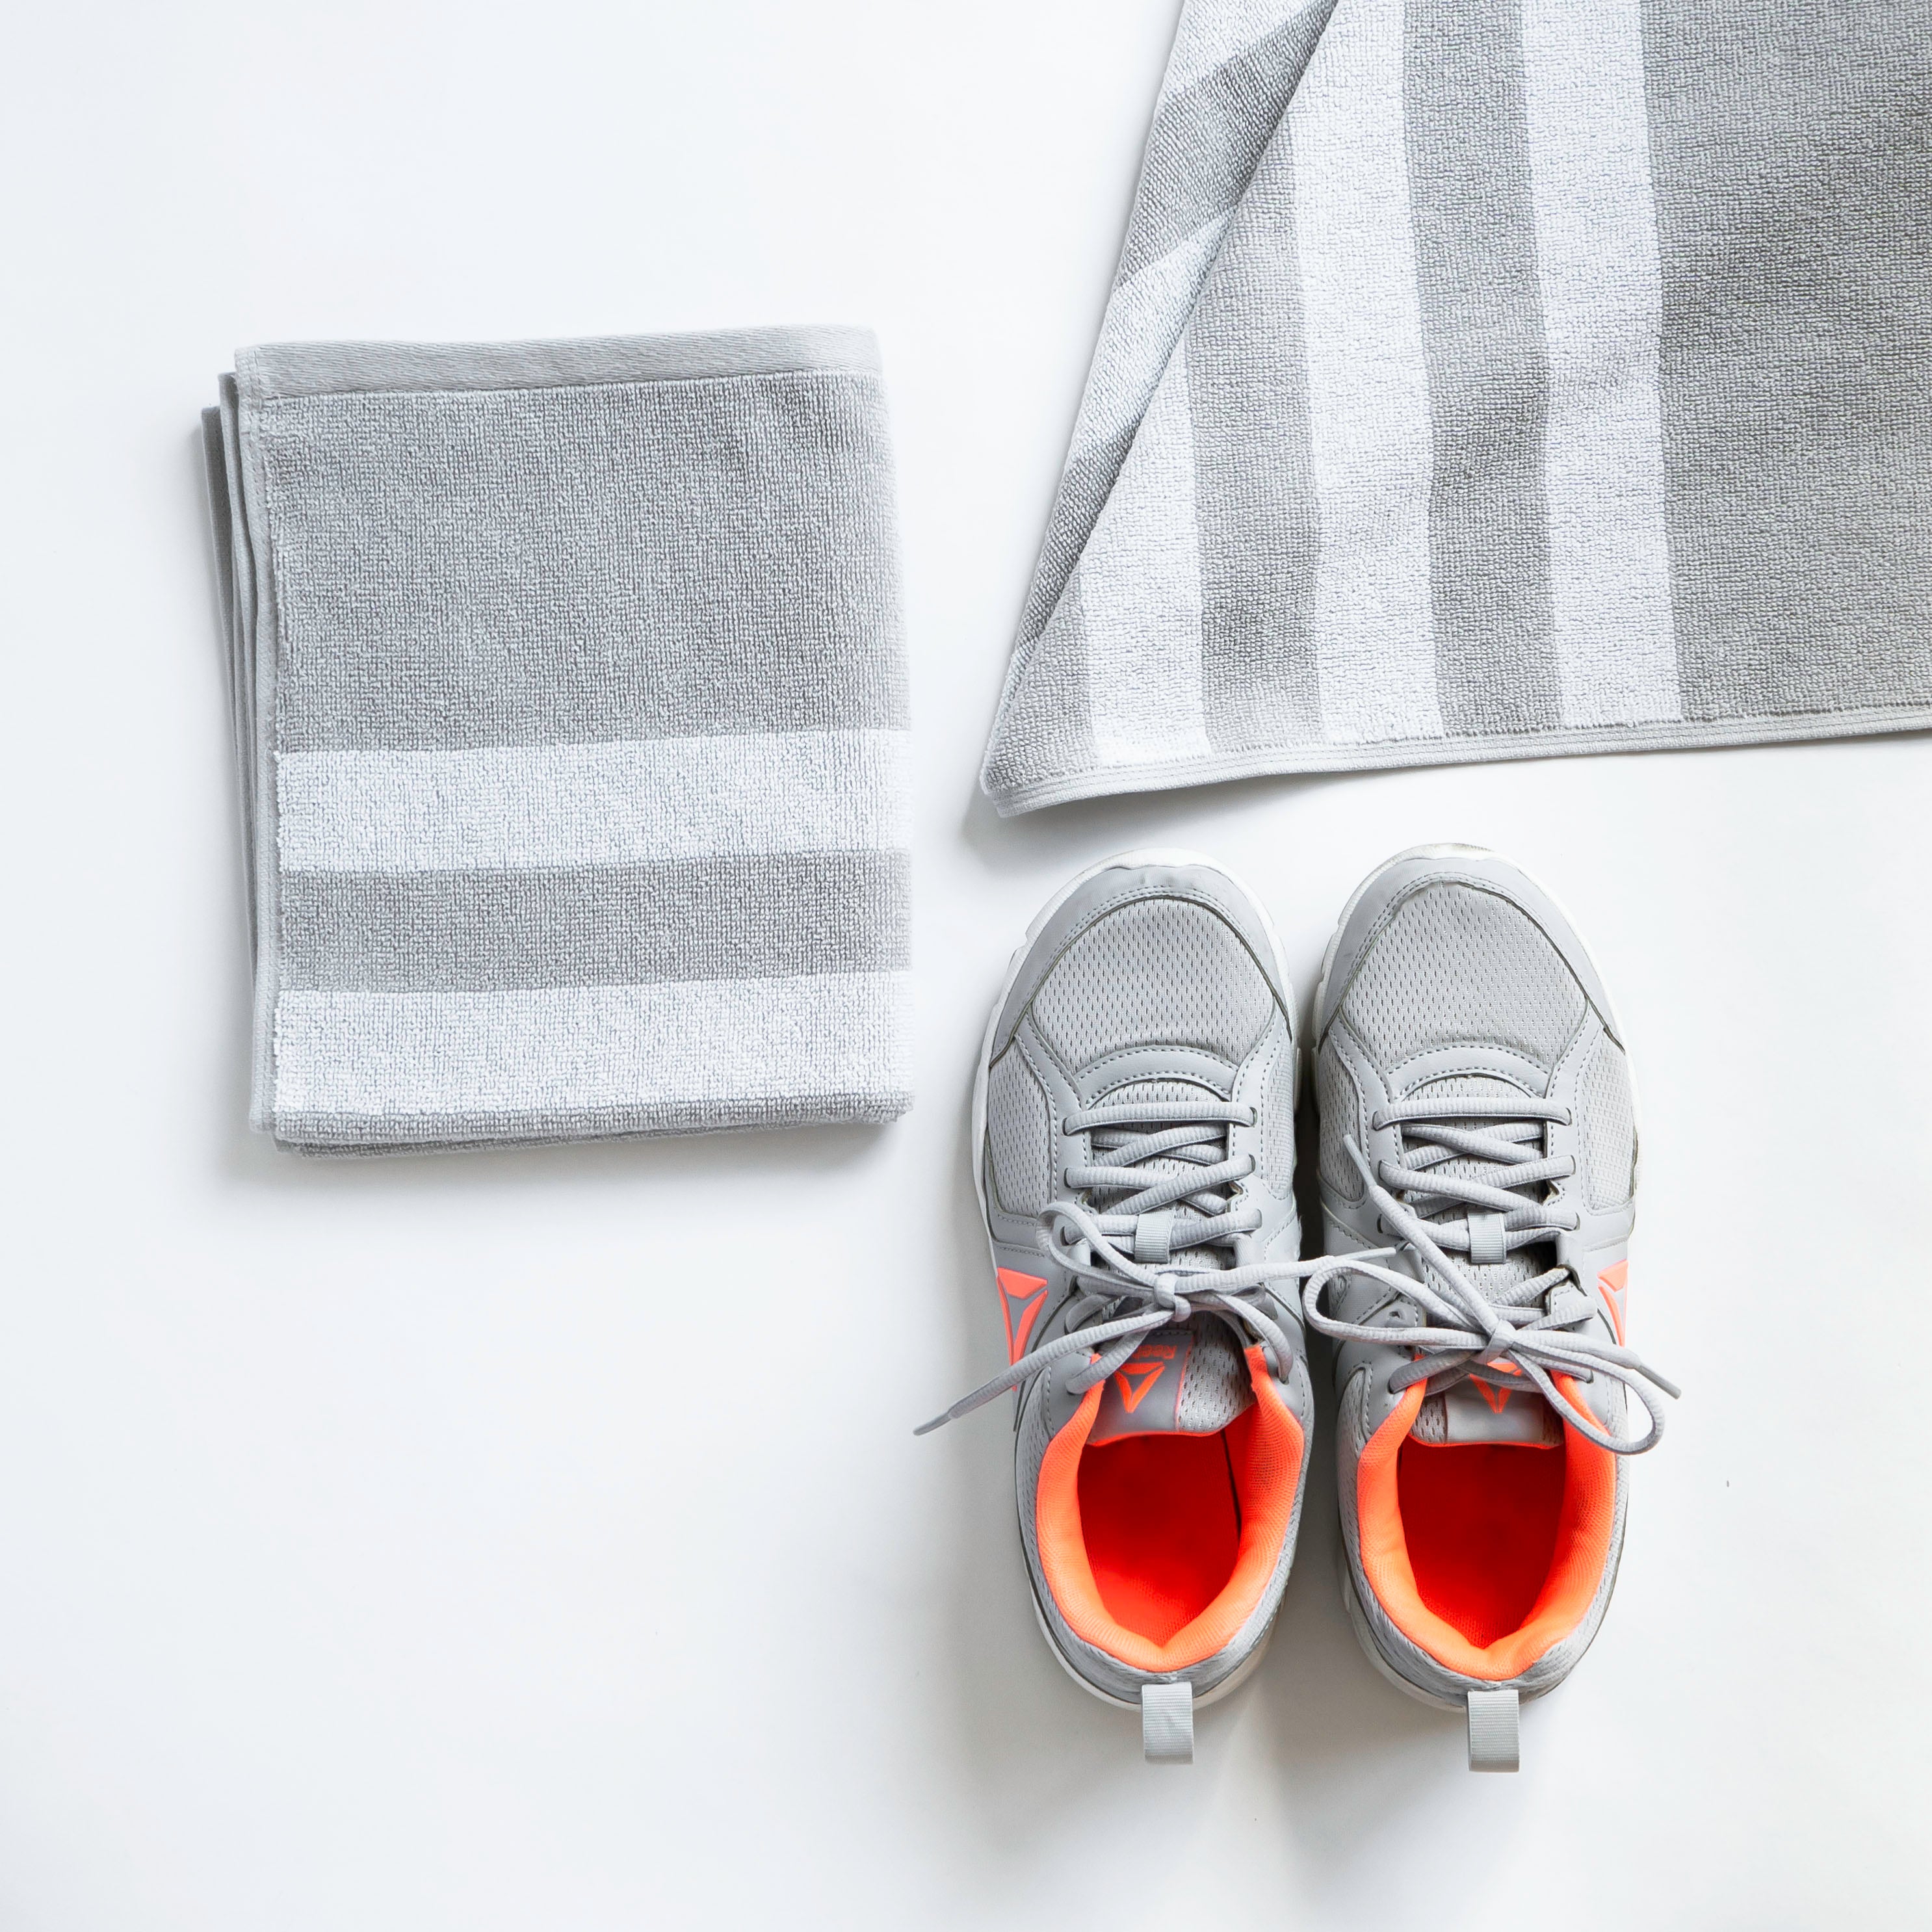 Striped Workout Towel in Quiet Gray-Luzia